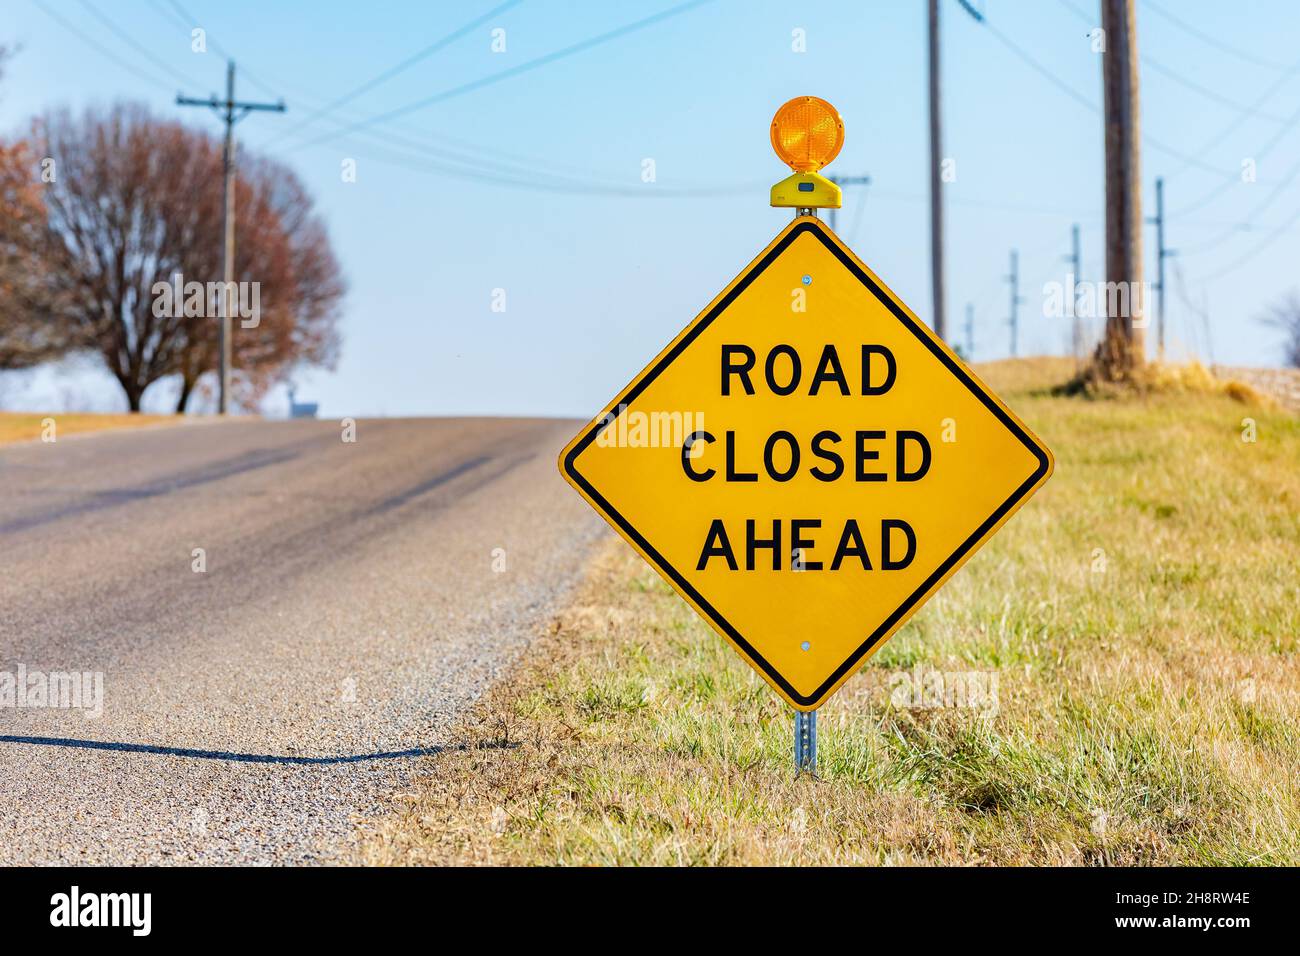 Yellow road closed ahead sign on rural road. Road construction, repair and travel safety concept. Stock Photo